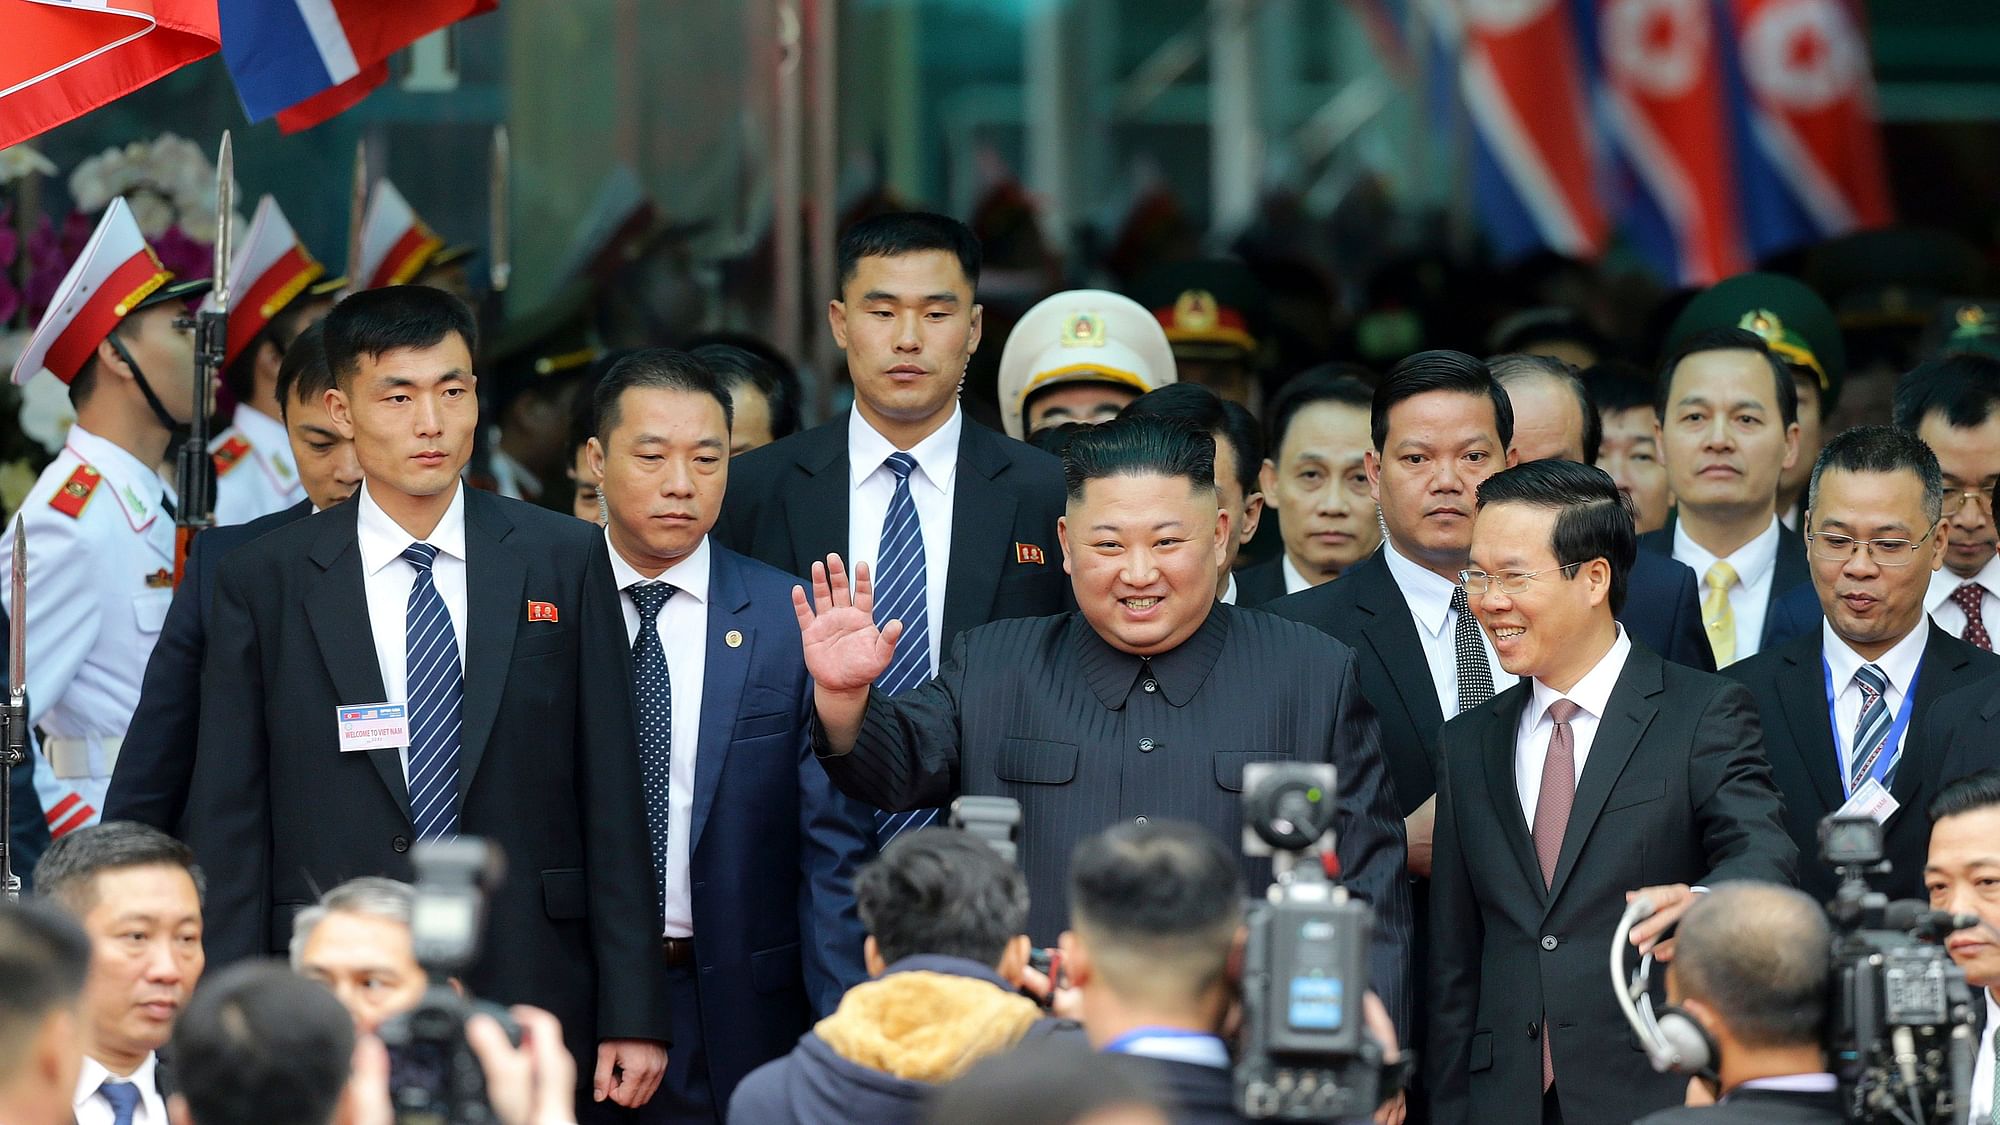 North Korean leader Kim Jong-un waves upon arrival by train in Dong Dang in Vietnam ahead of his second summit with US President Donald Trump. 